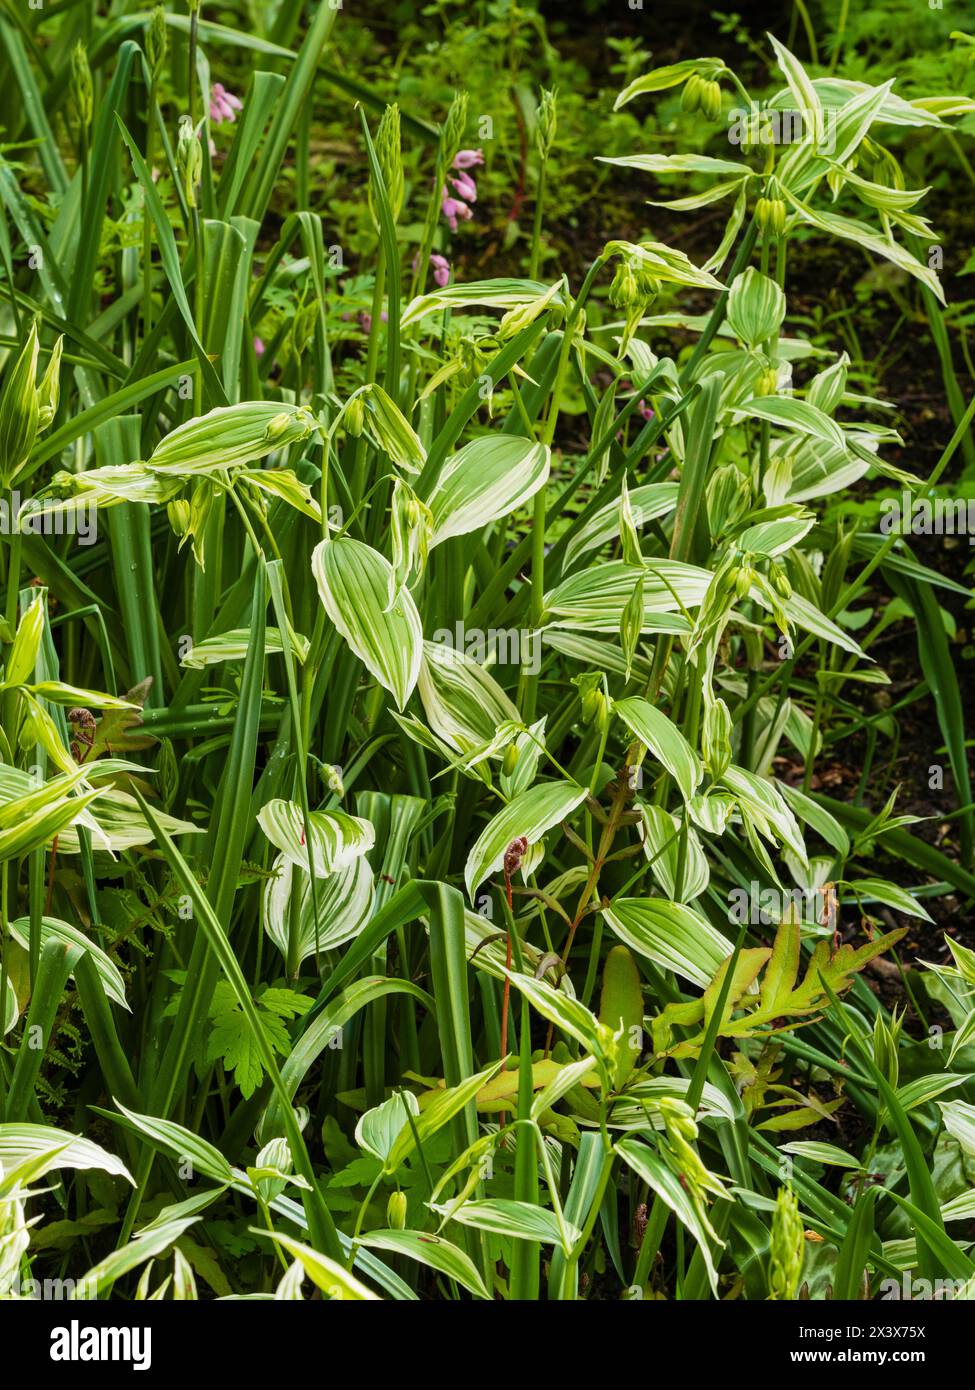 Green and white spring foliage of the variegated form of the hardy perennial woodland plant, Disporum sessile 'Variegatum' Stock Photo